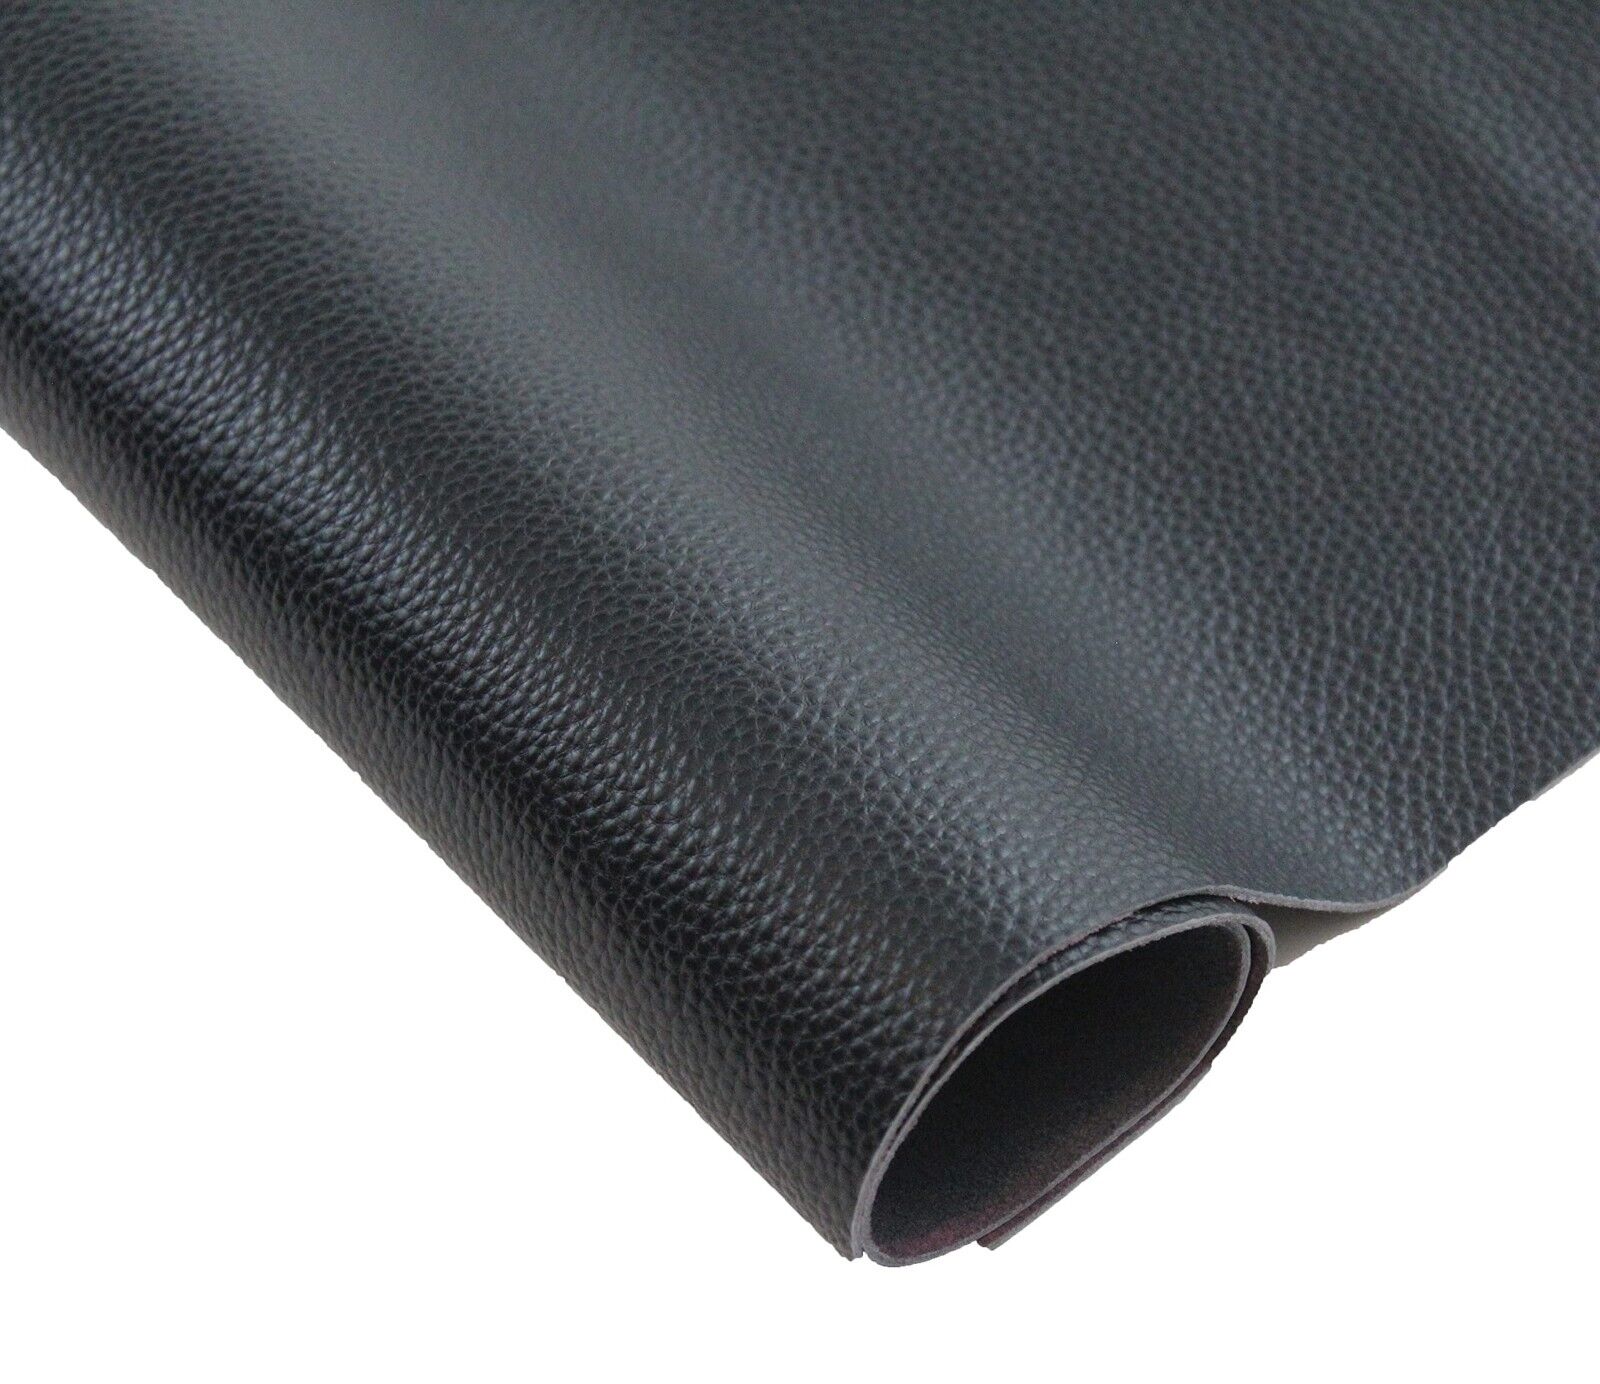 Top Grain Cowhide Black Leather for DIY, Sewing, Crafting, Tooling & Furniture